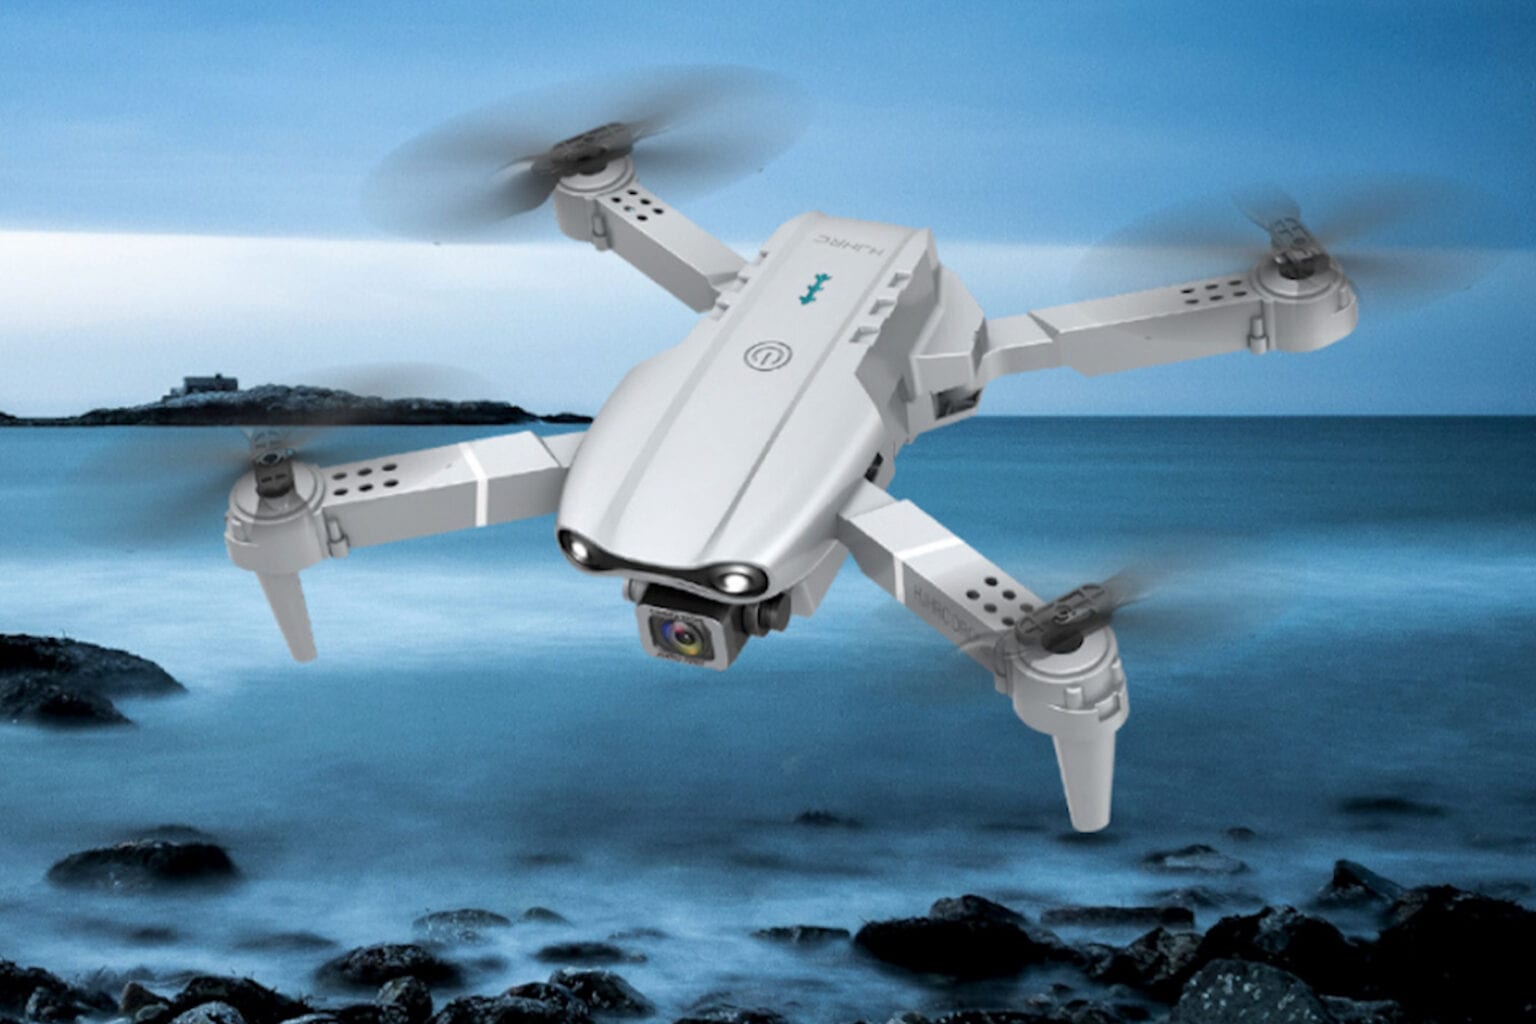 Save 62 percent off these dual-camera quadcopters by Ninja Dragon.